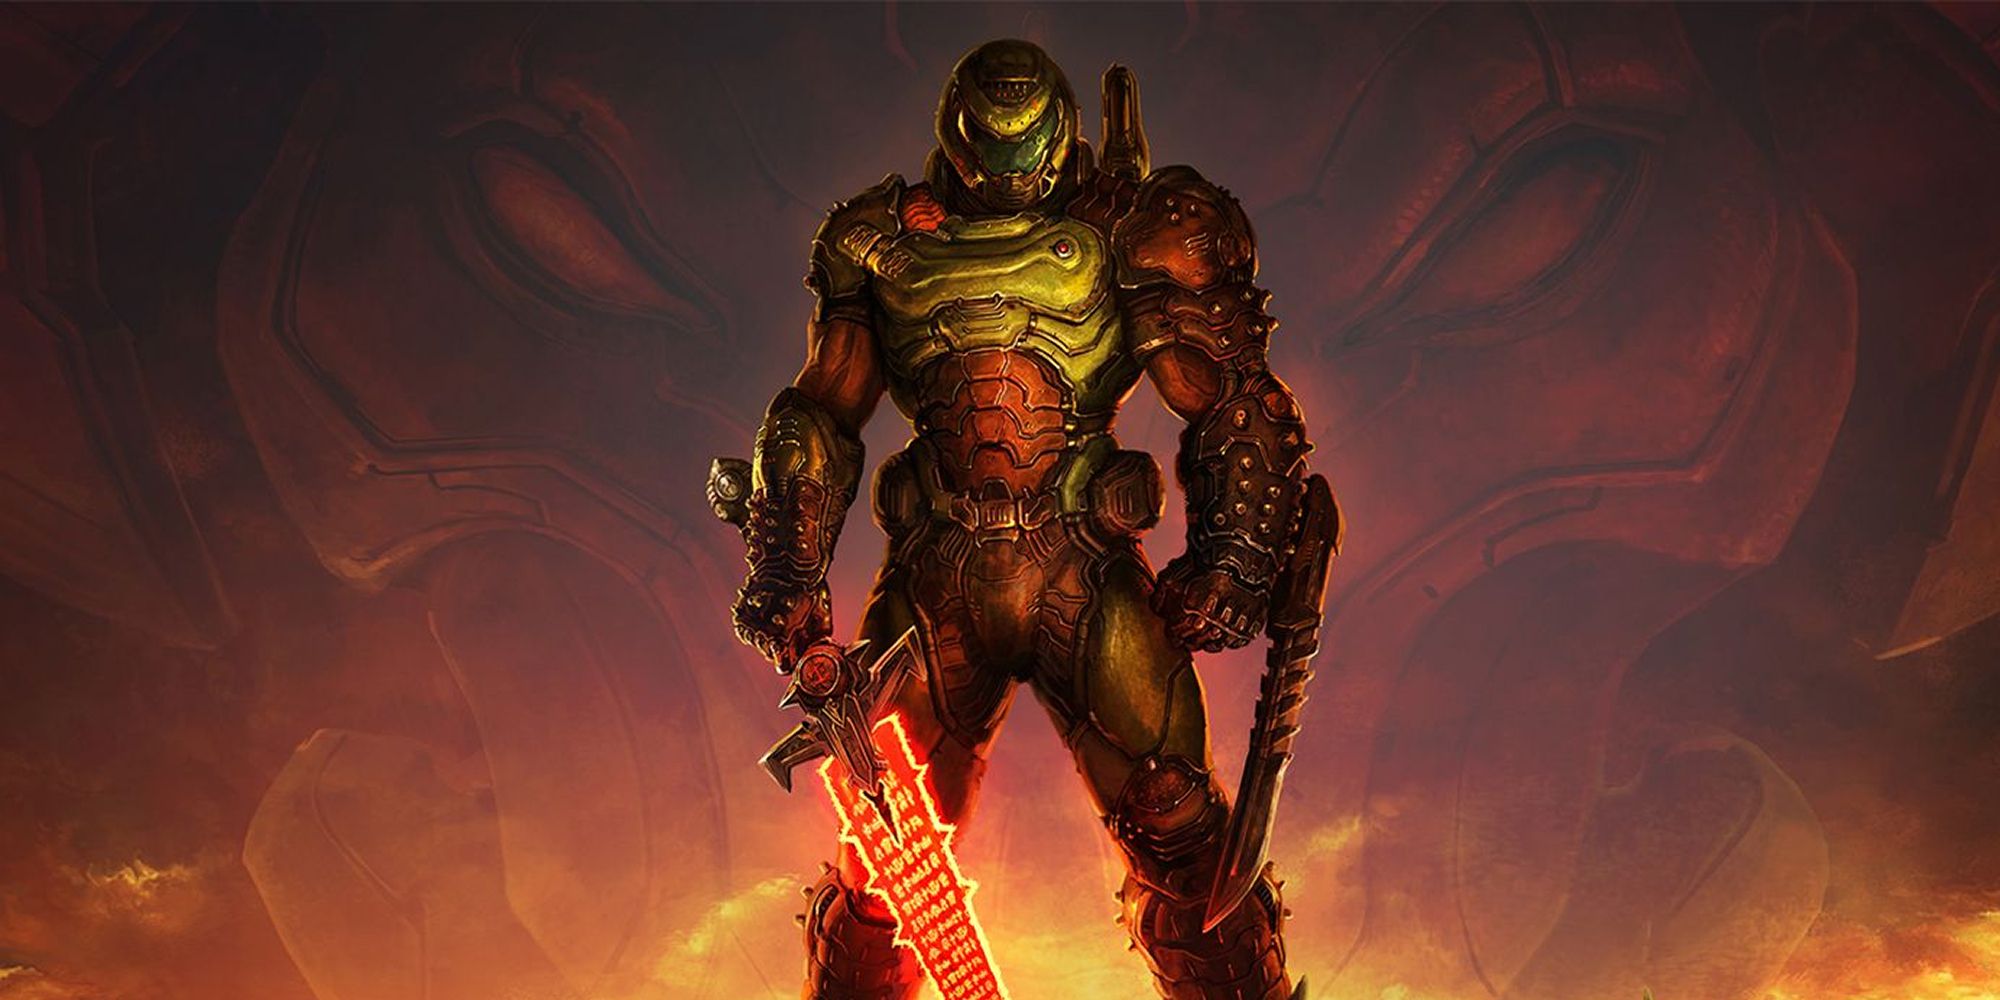 Doomguy is ready to fight